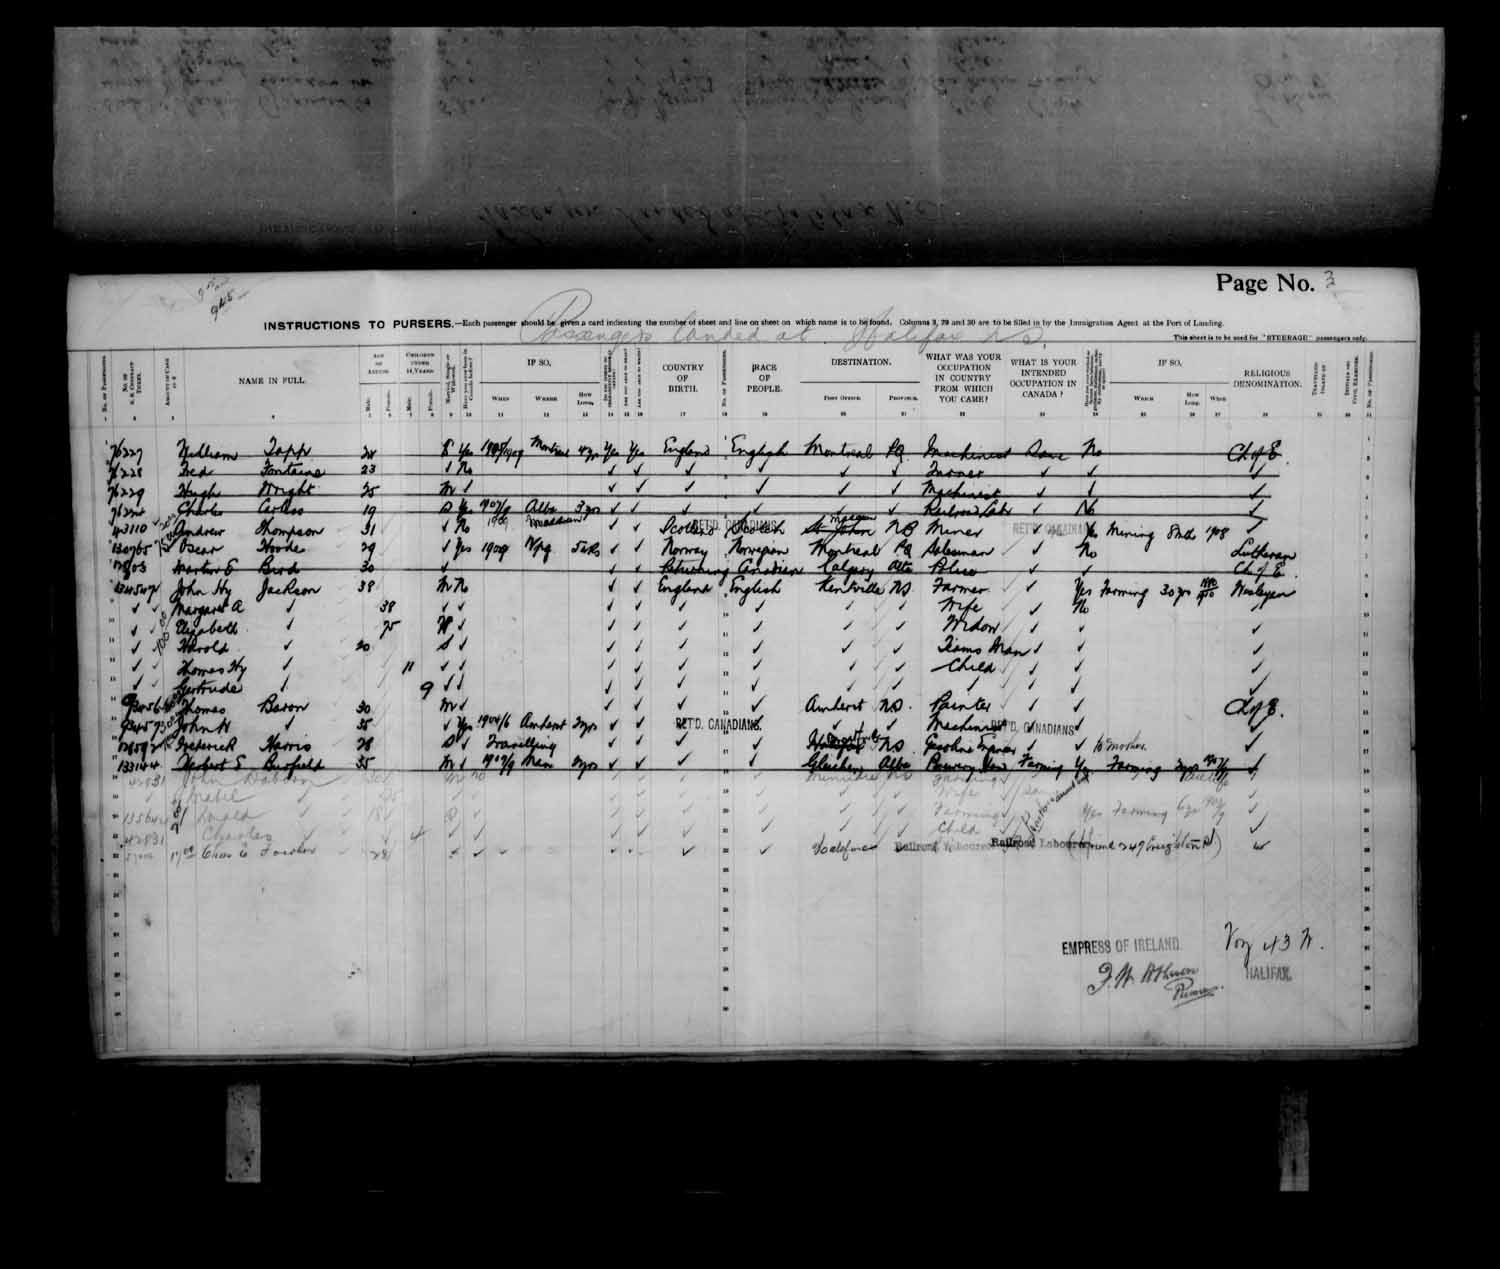 Digitized page of Quebec Passenger Lists for Image No.: e003683616